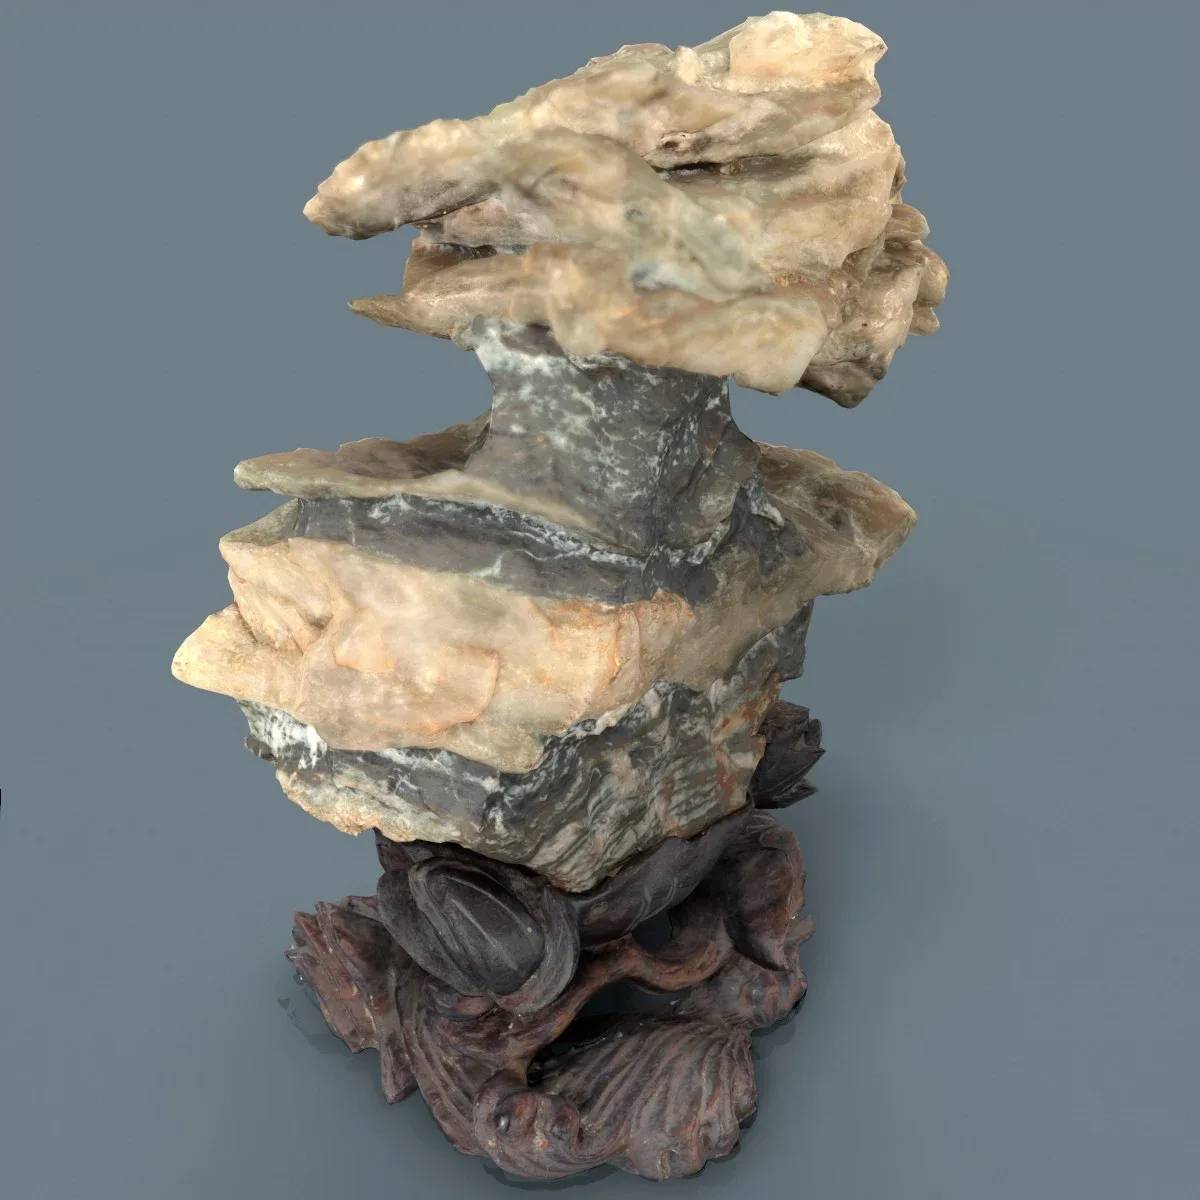 Suiseki Stone 9 from Japan - High-Quality 3D Model with Metallic-Roughness PBR Textures for Games, VR, and Art Projects